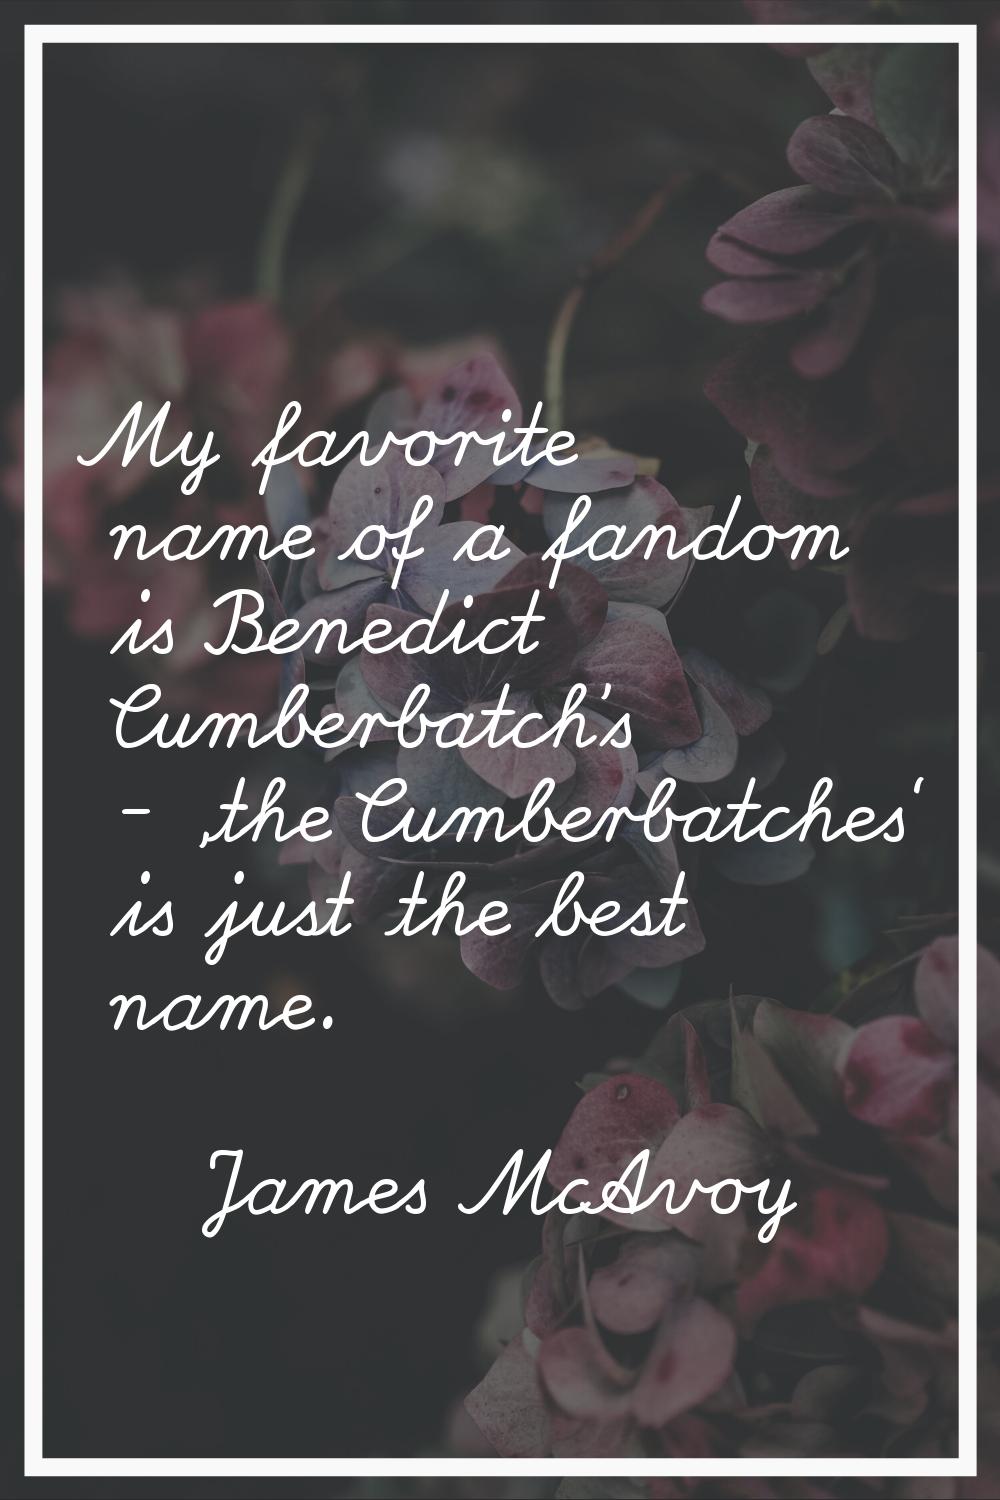 My favorite name of a fandom is Benedict Cumberbatch's - 'the Cumberbatches' is just the best name.